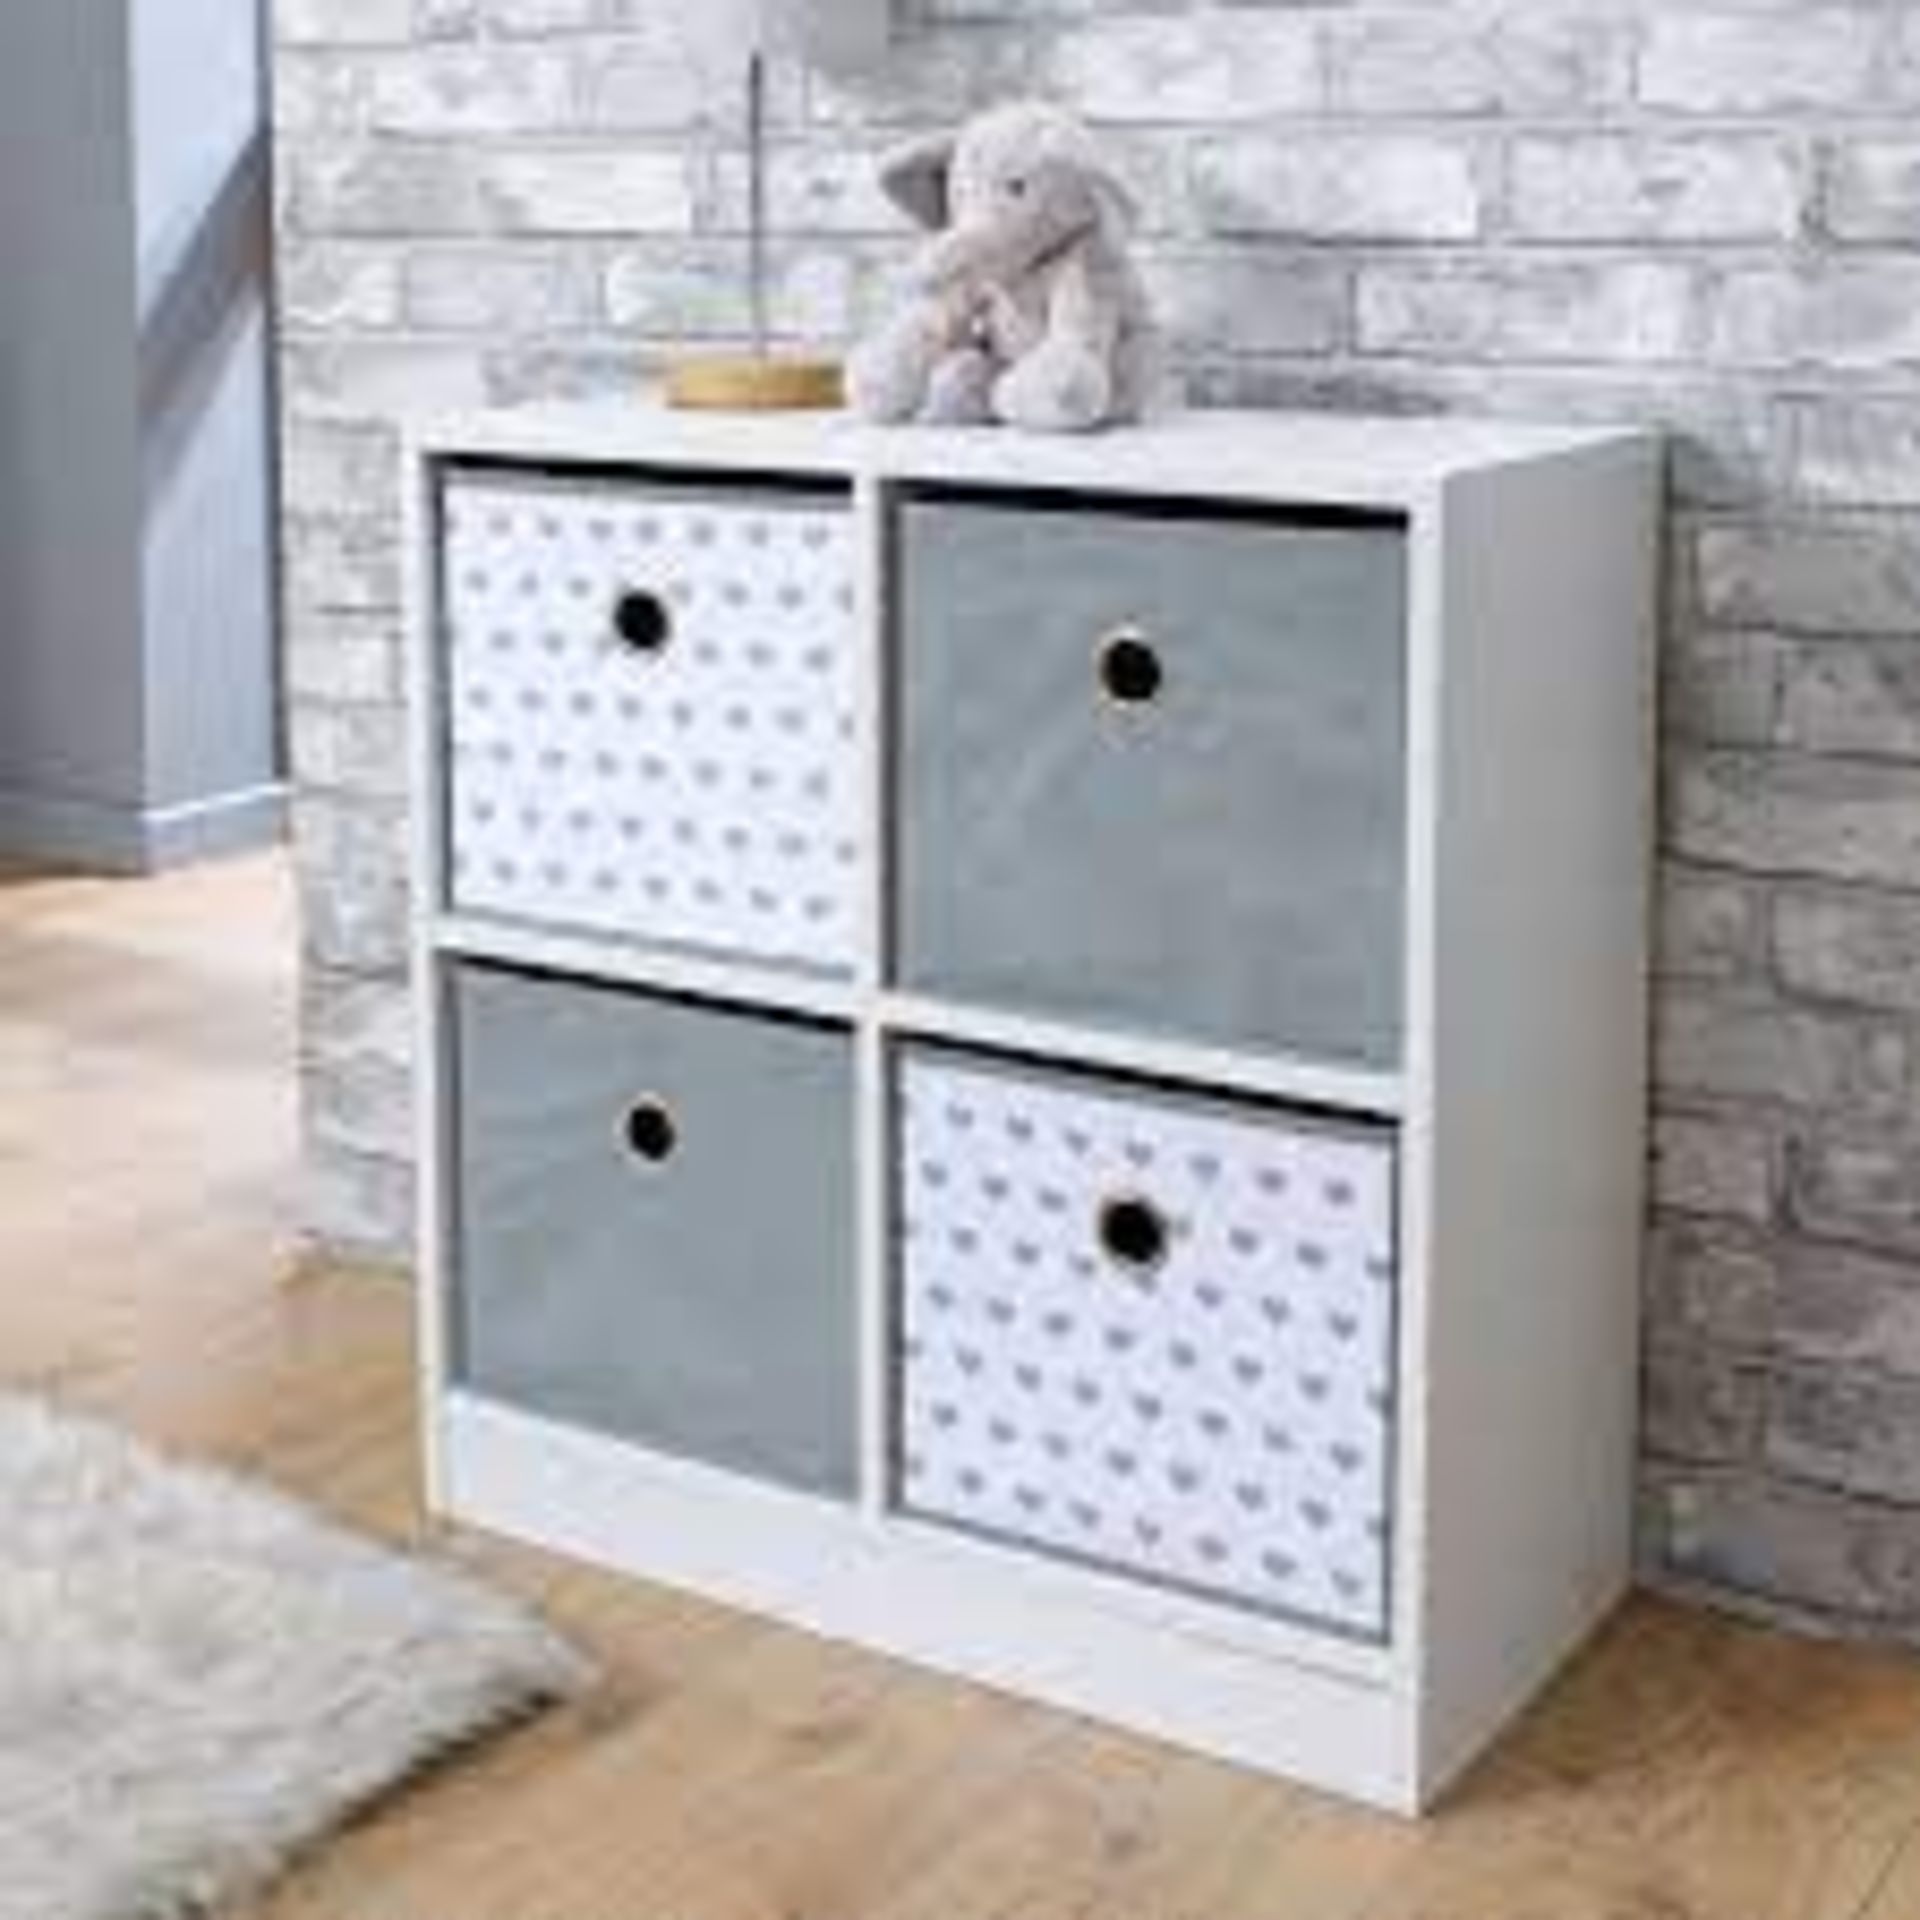 Jive 4 Cube Drawers - Grey/Grey Hearts. - SR3. Update your storage solutions with cube storage units